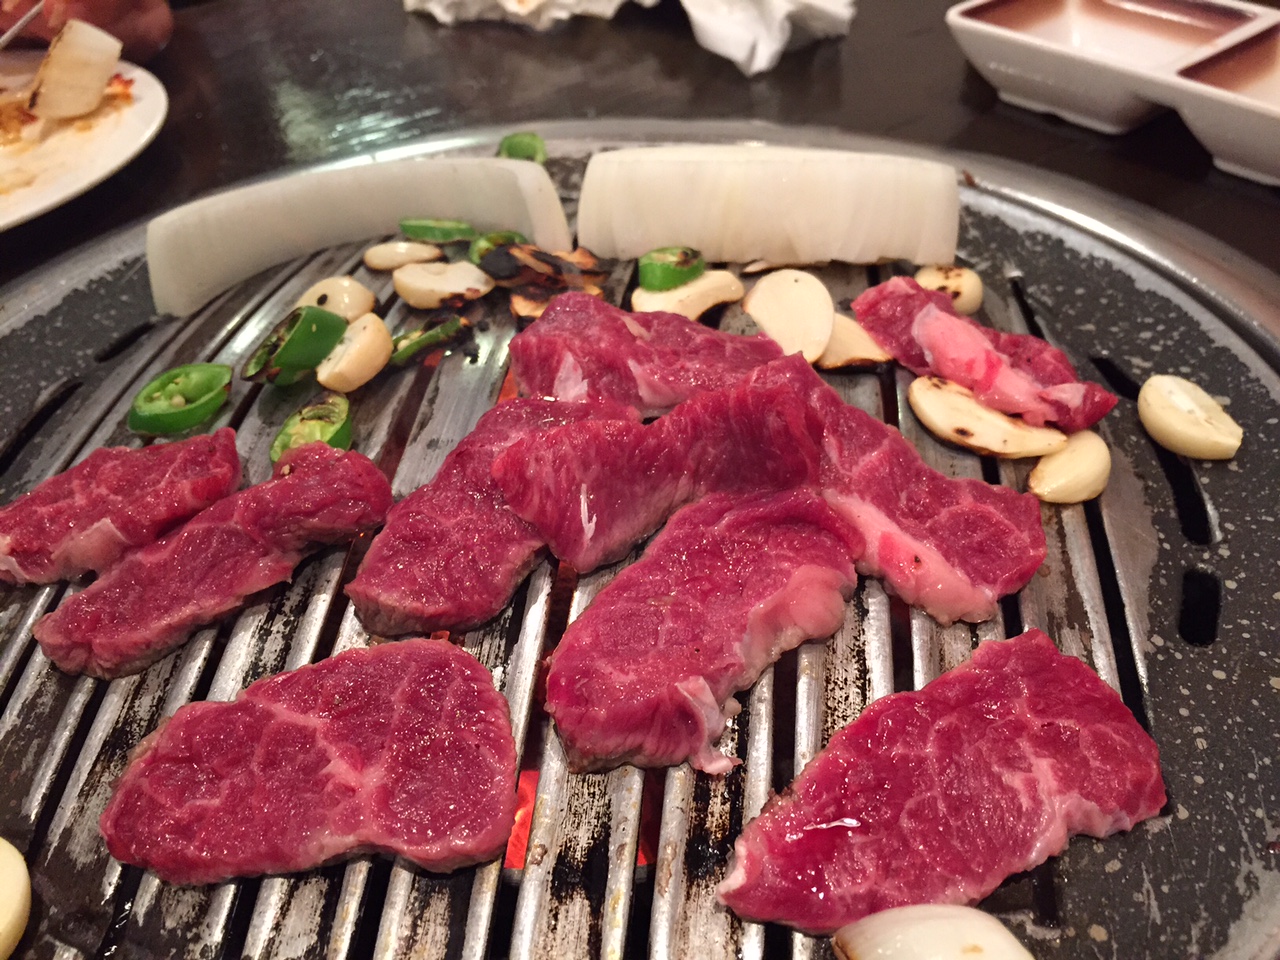 Special cuts of sirloin on the grill. Photo: SE